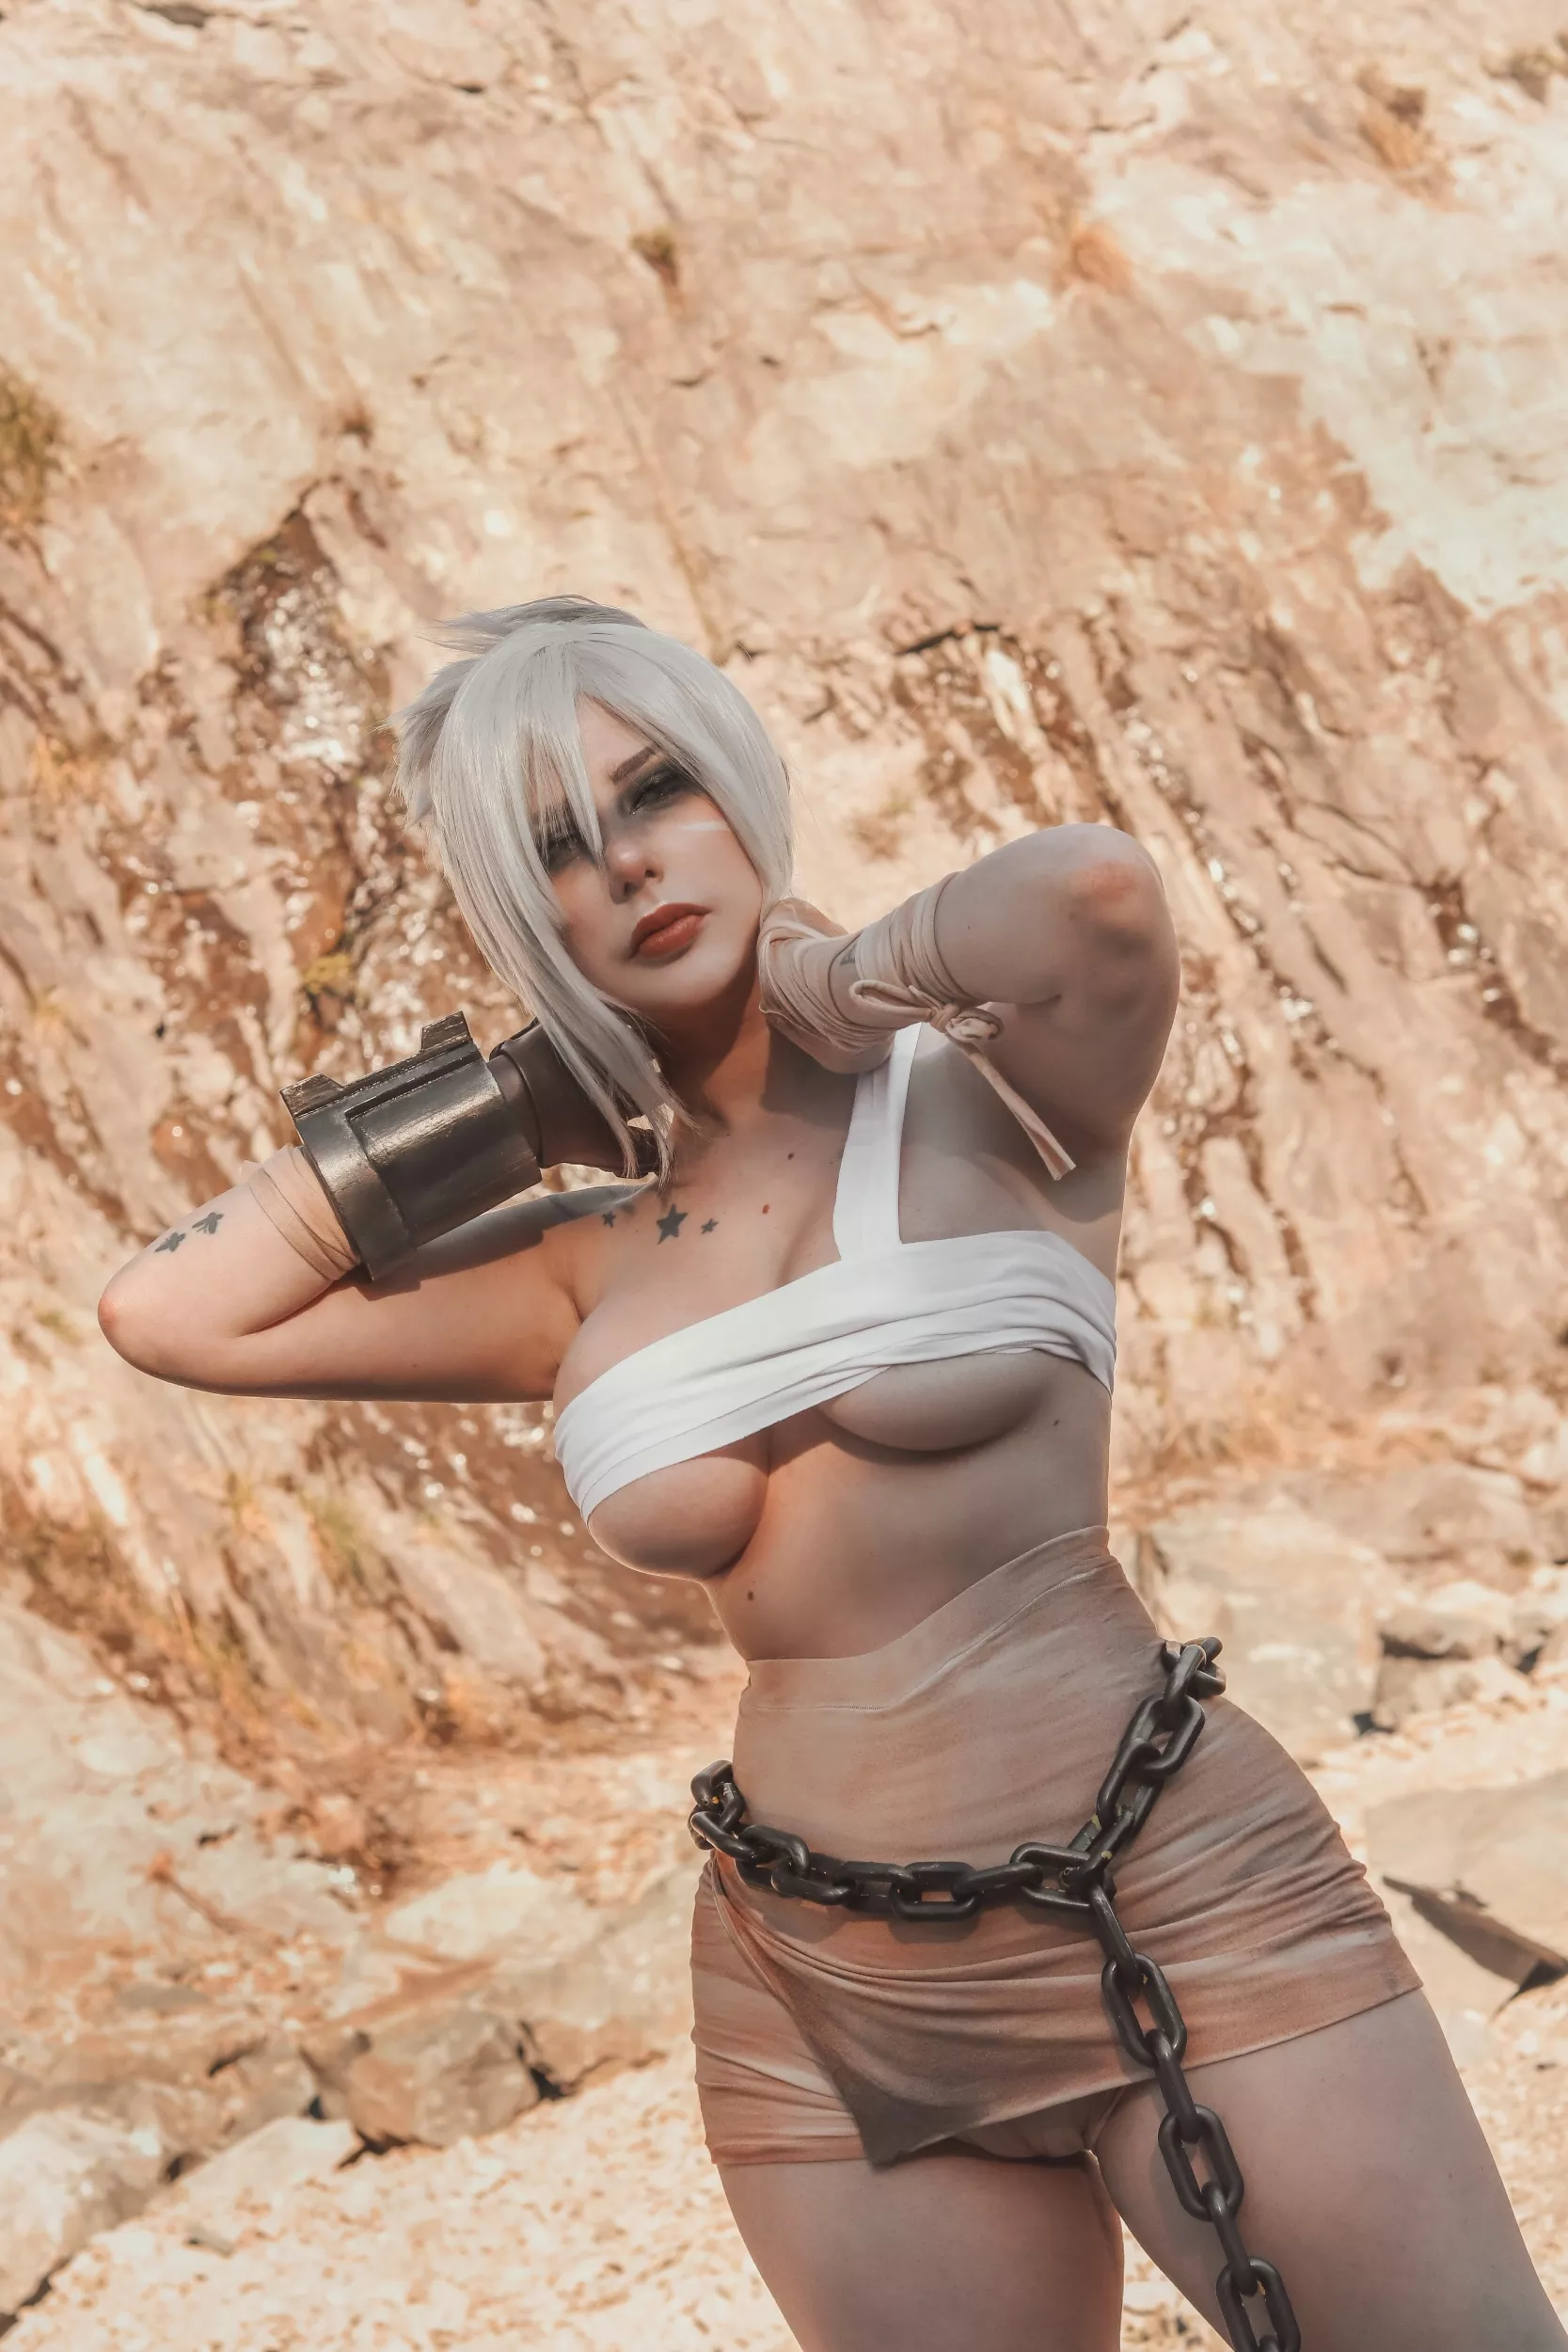 Riven By Giu Hellsing Nudes Nsfwcostumes Nude Pics Org